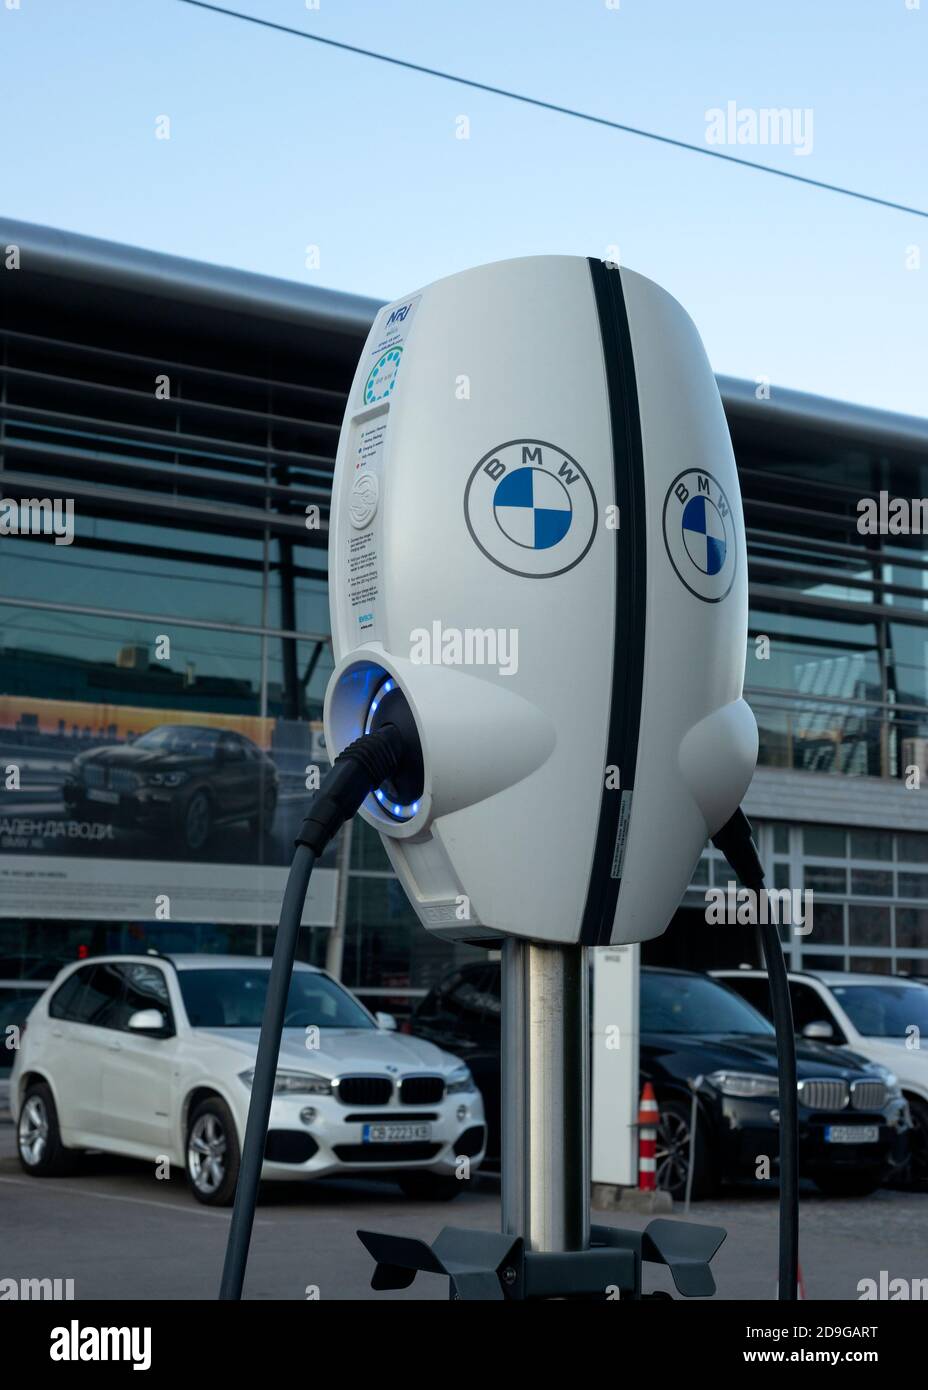 22 kW Evbox charging point or electric car charging station at the BMW and Mini main dealership store and headquarters in Sofia Bulgaria Europe Stock Photo